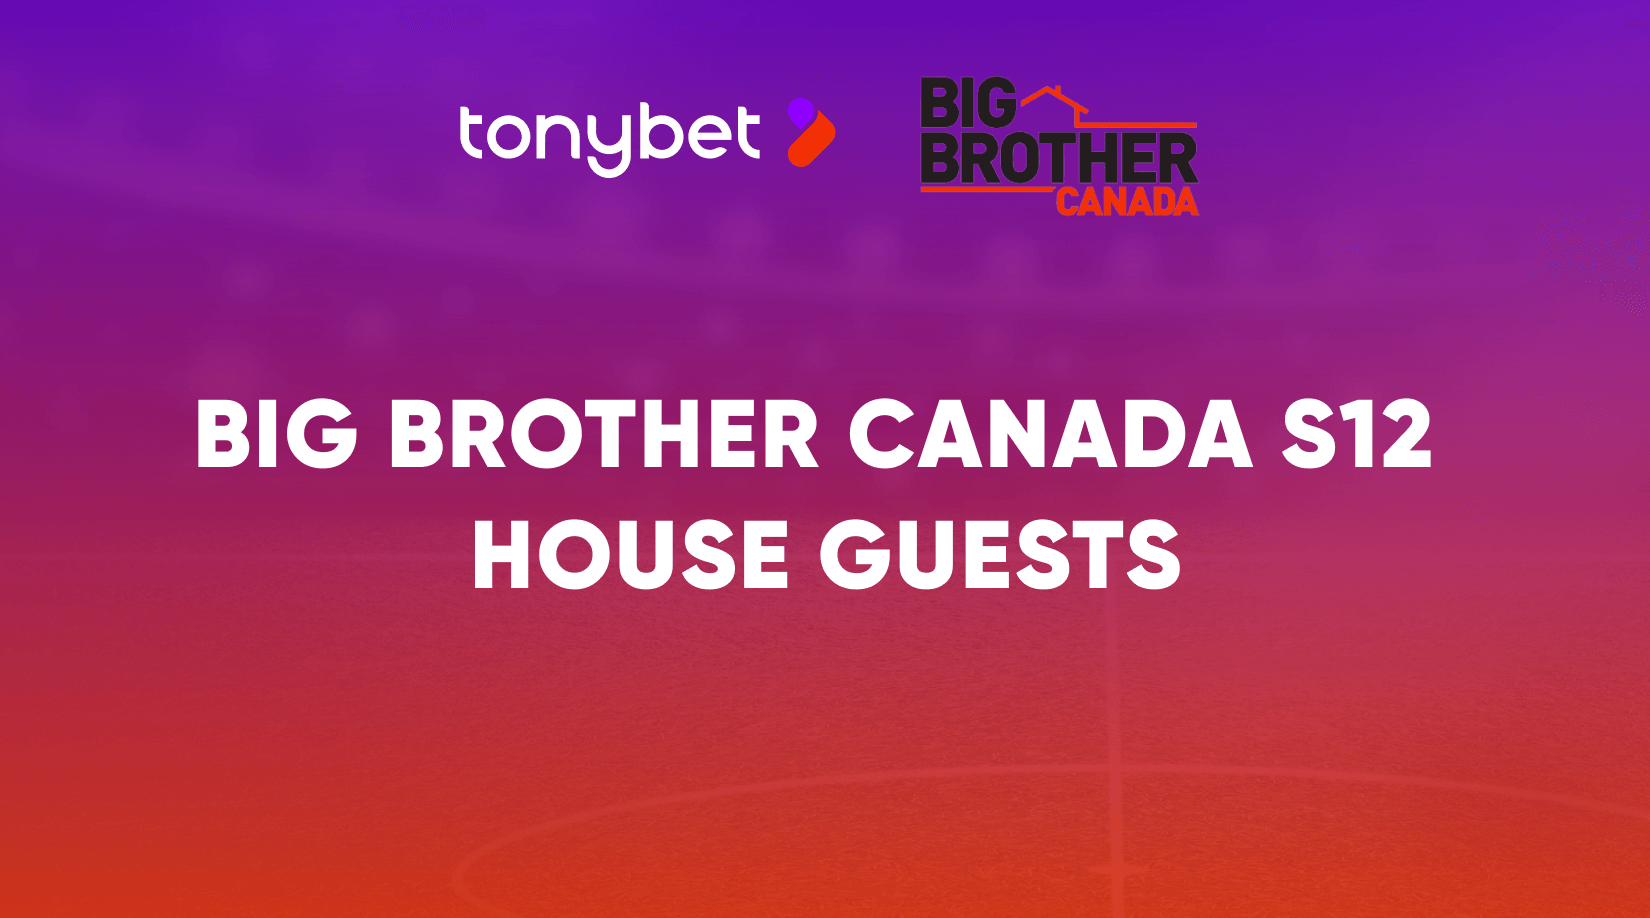 Big Brother Canada S12 - Who are the House Guests?